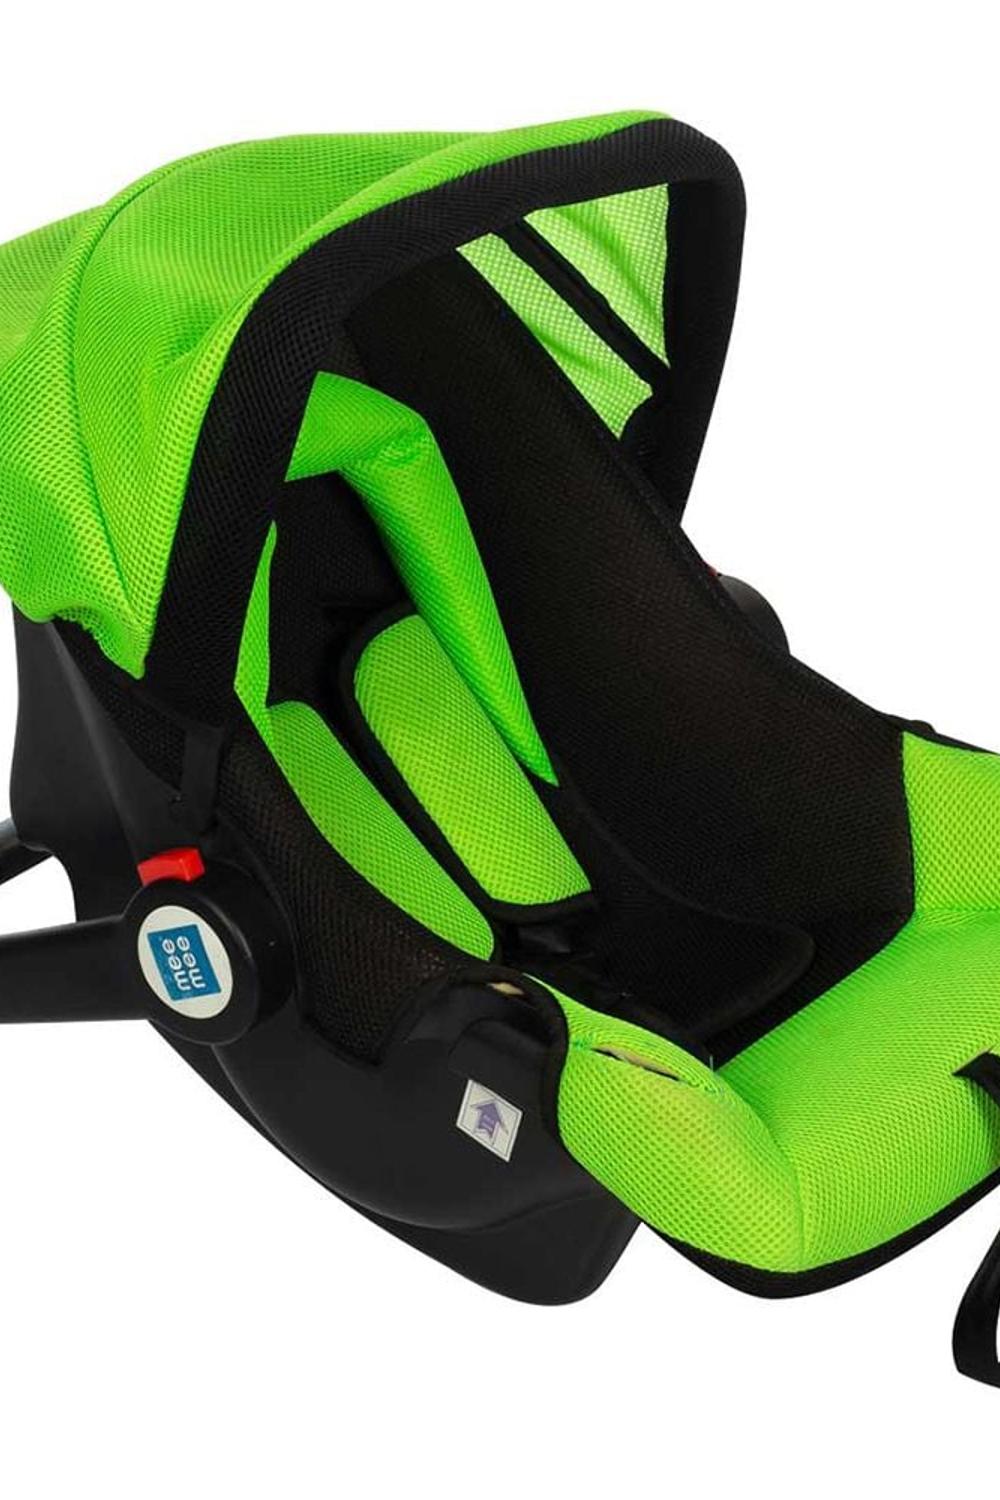 Mee Mee Baby Car Seat cum Carry Cot with Thick Cus